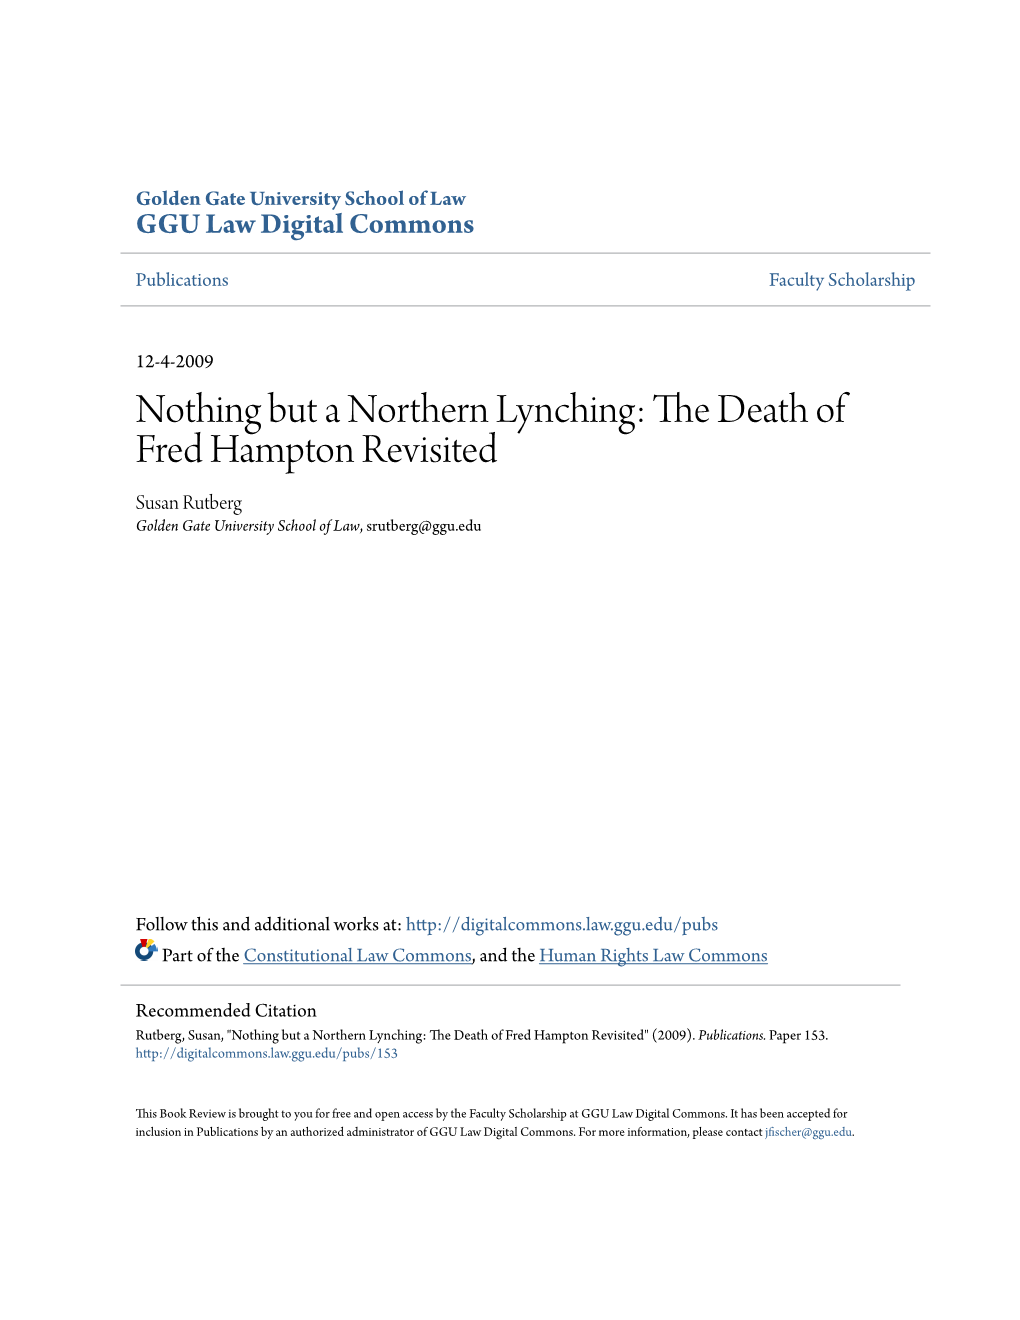 Nothing but a Northern Lynching: the Death of Fred Hampton Revisited